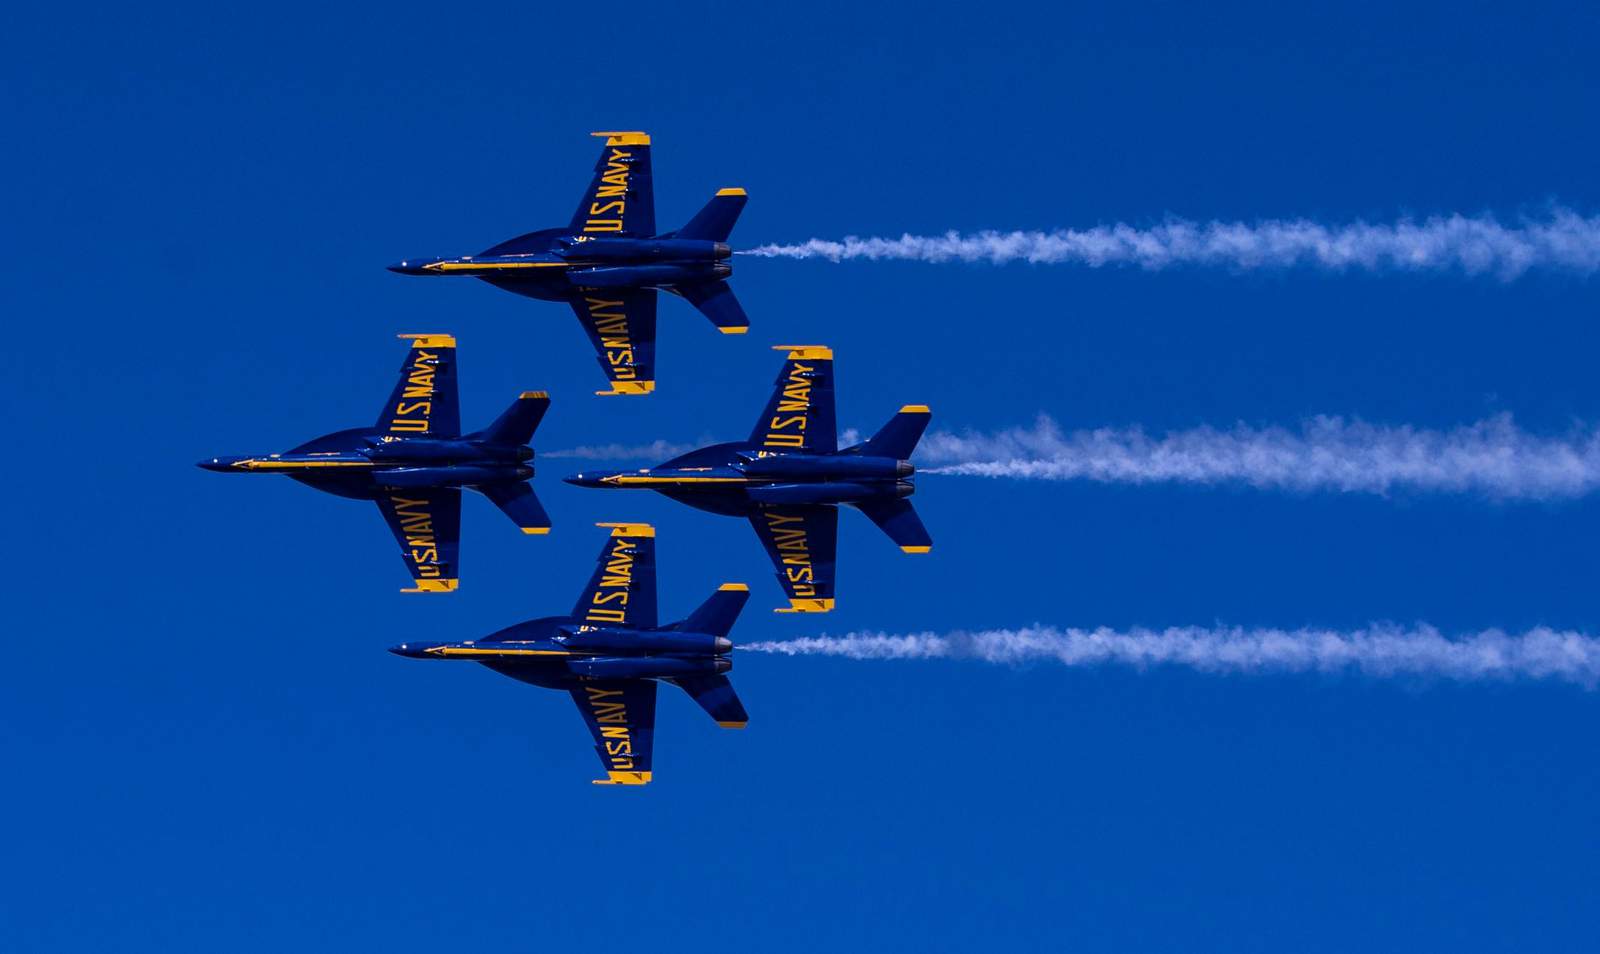 Blue Angels to fly new F-18 Super Hornet jet at Melbourne air show